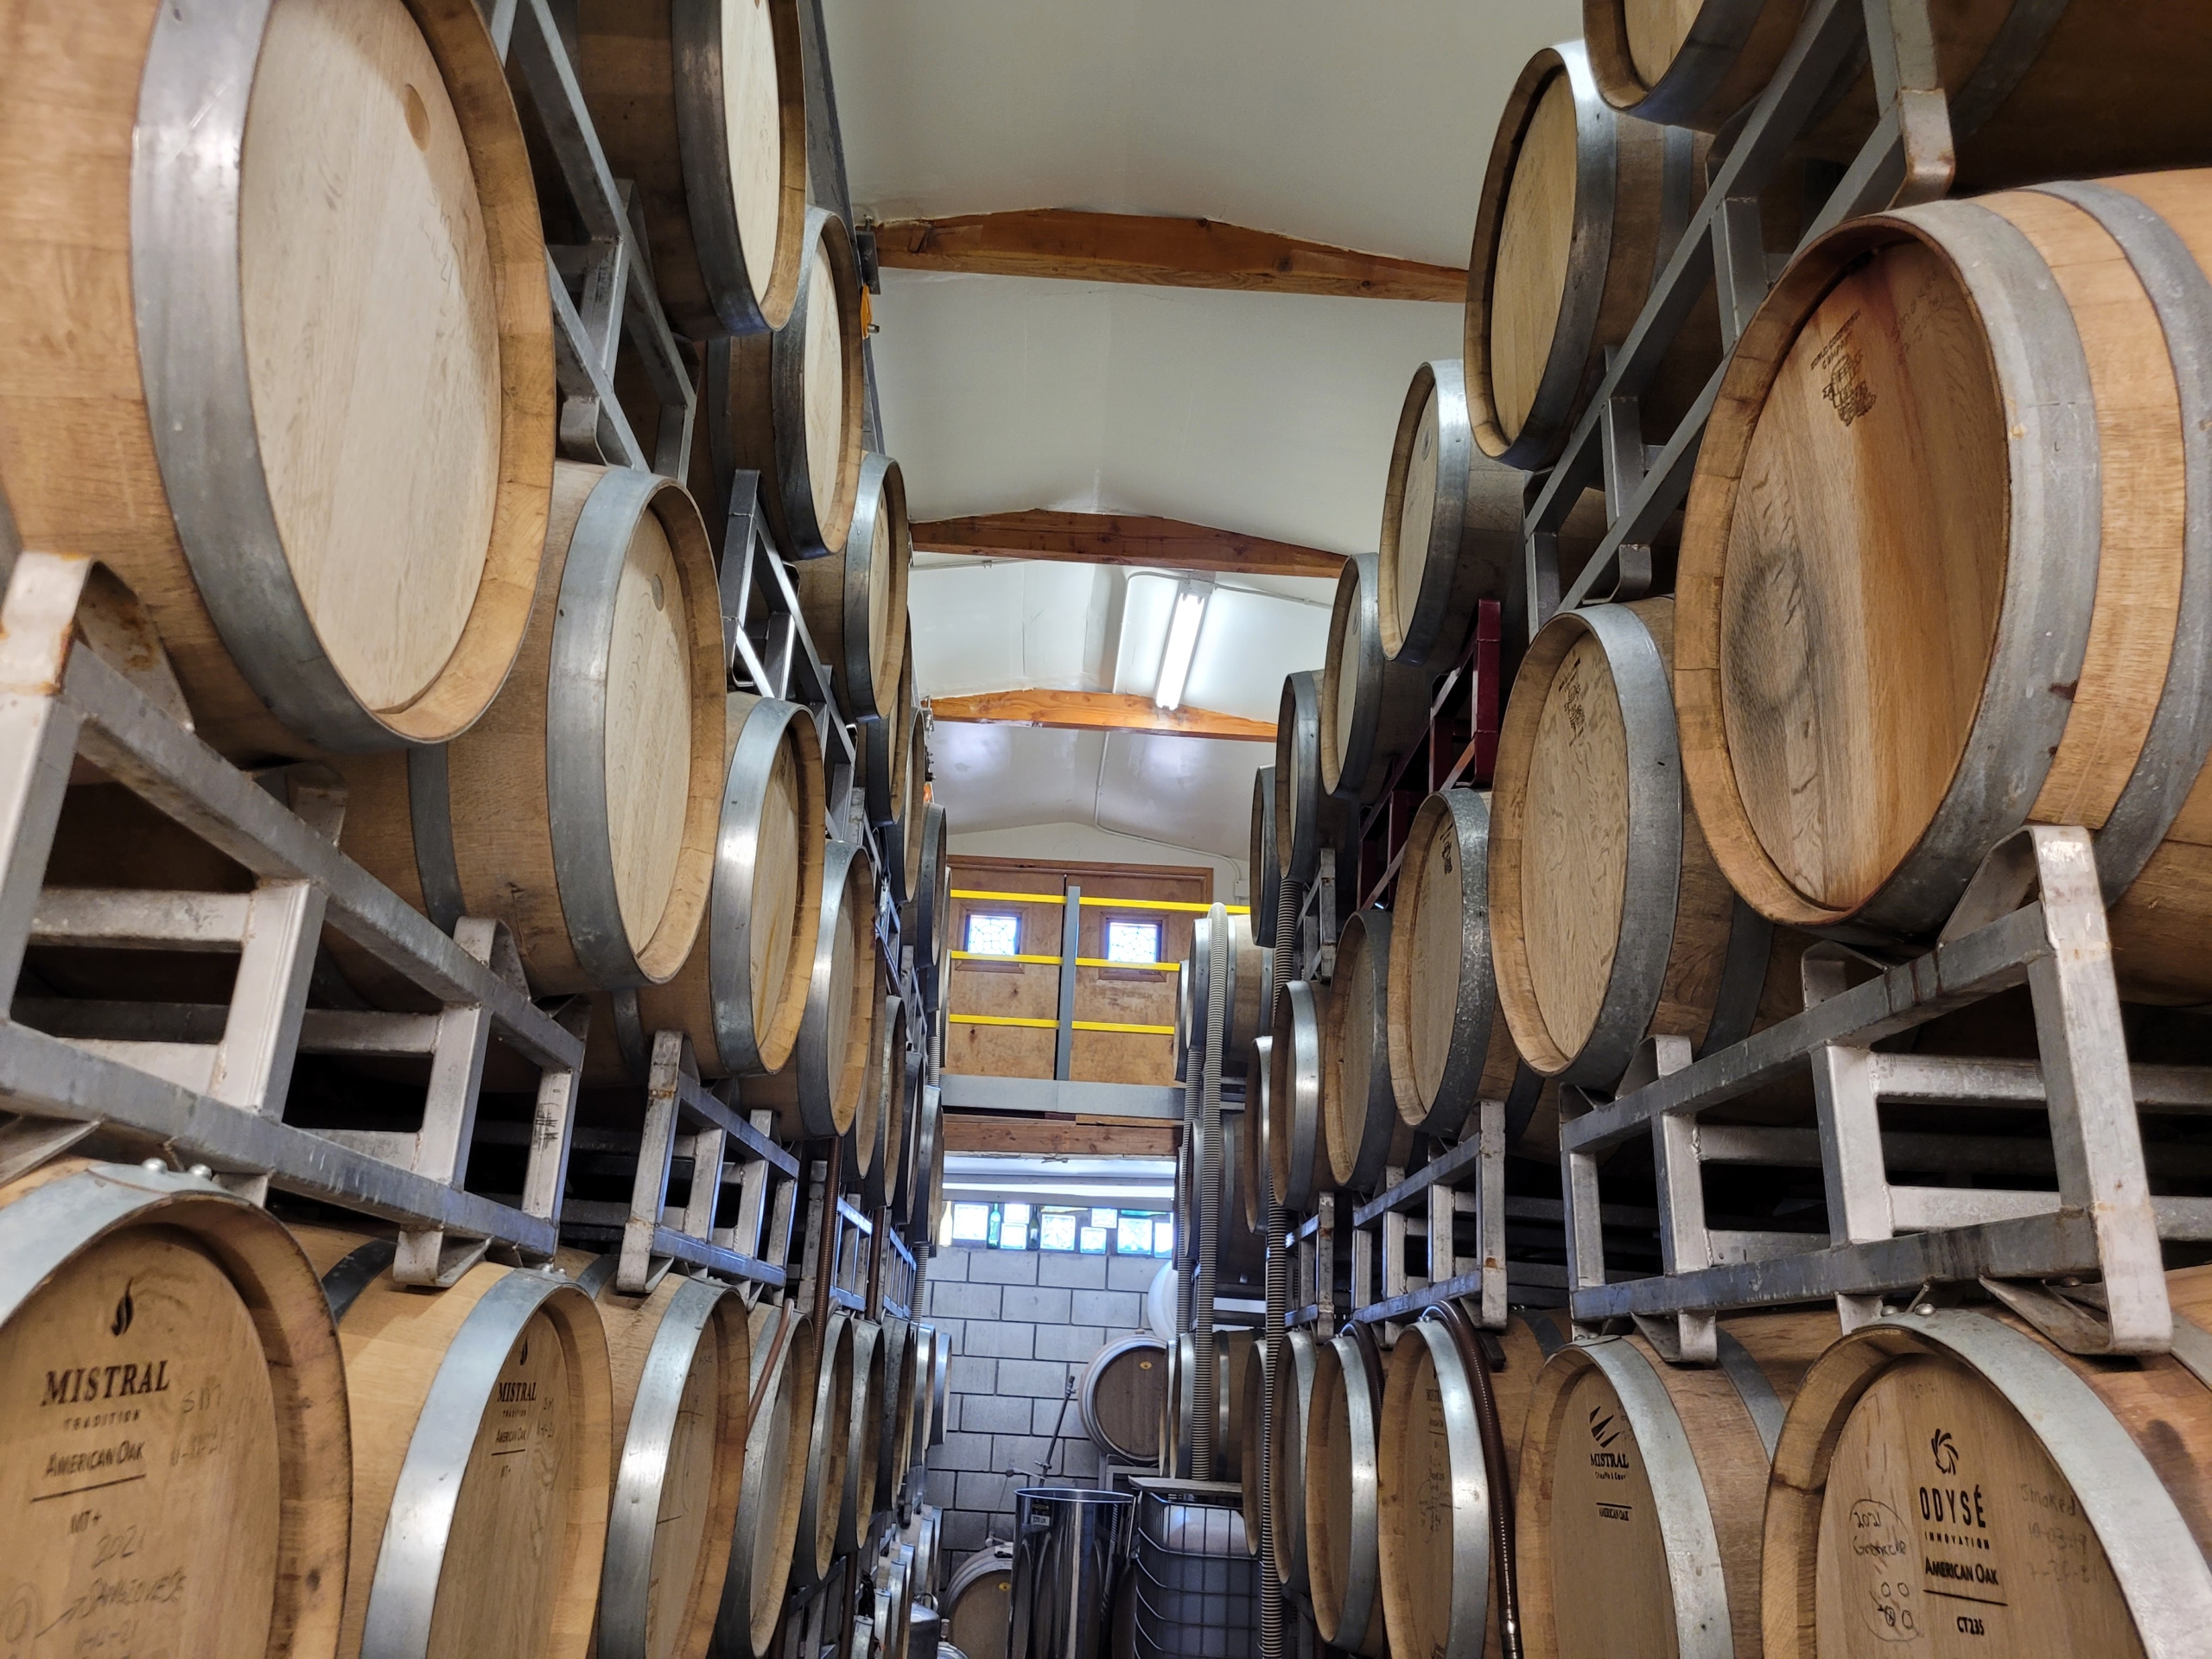 Here is a photo of wine barrels.